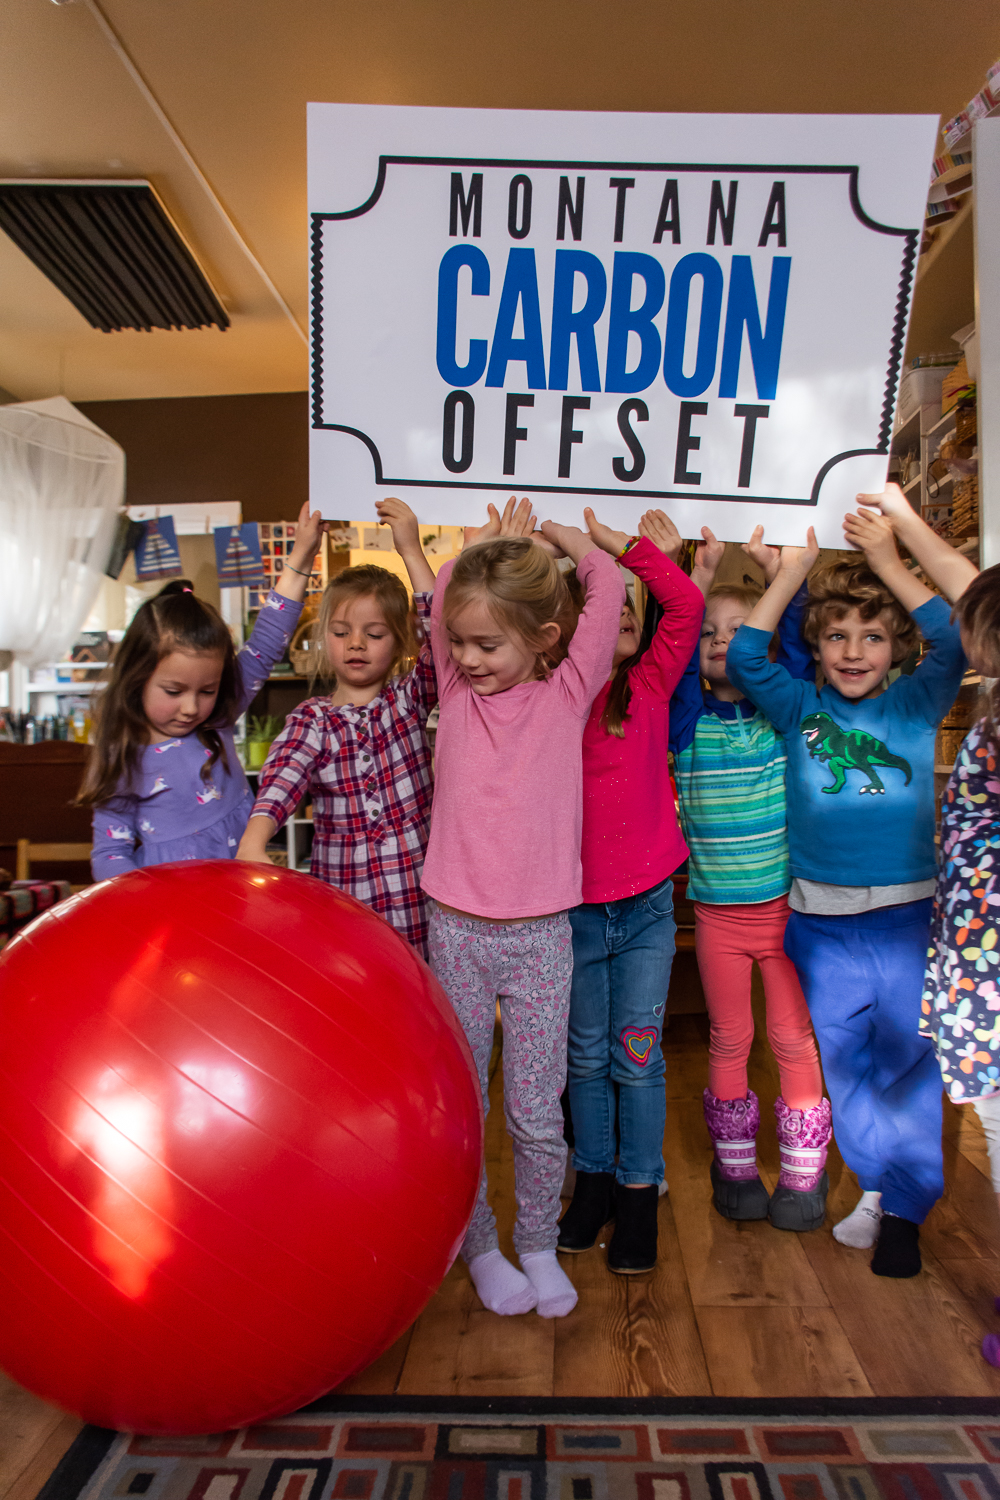 Check out our new Montana Carbon Offset Program!